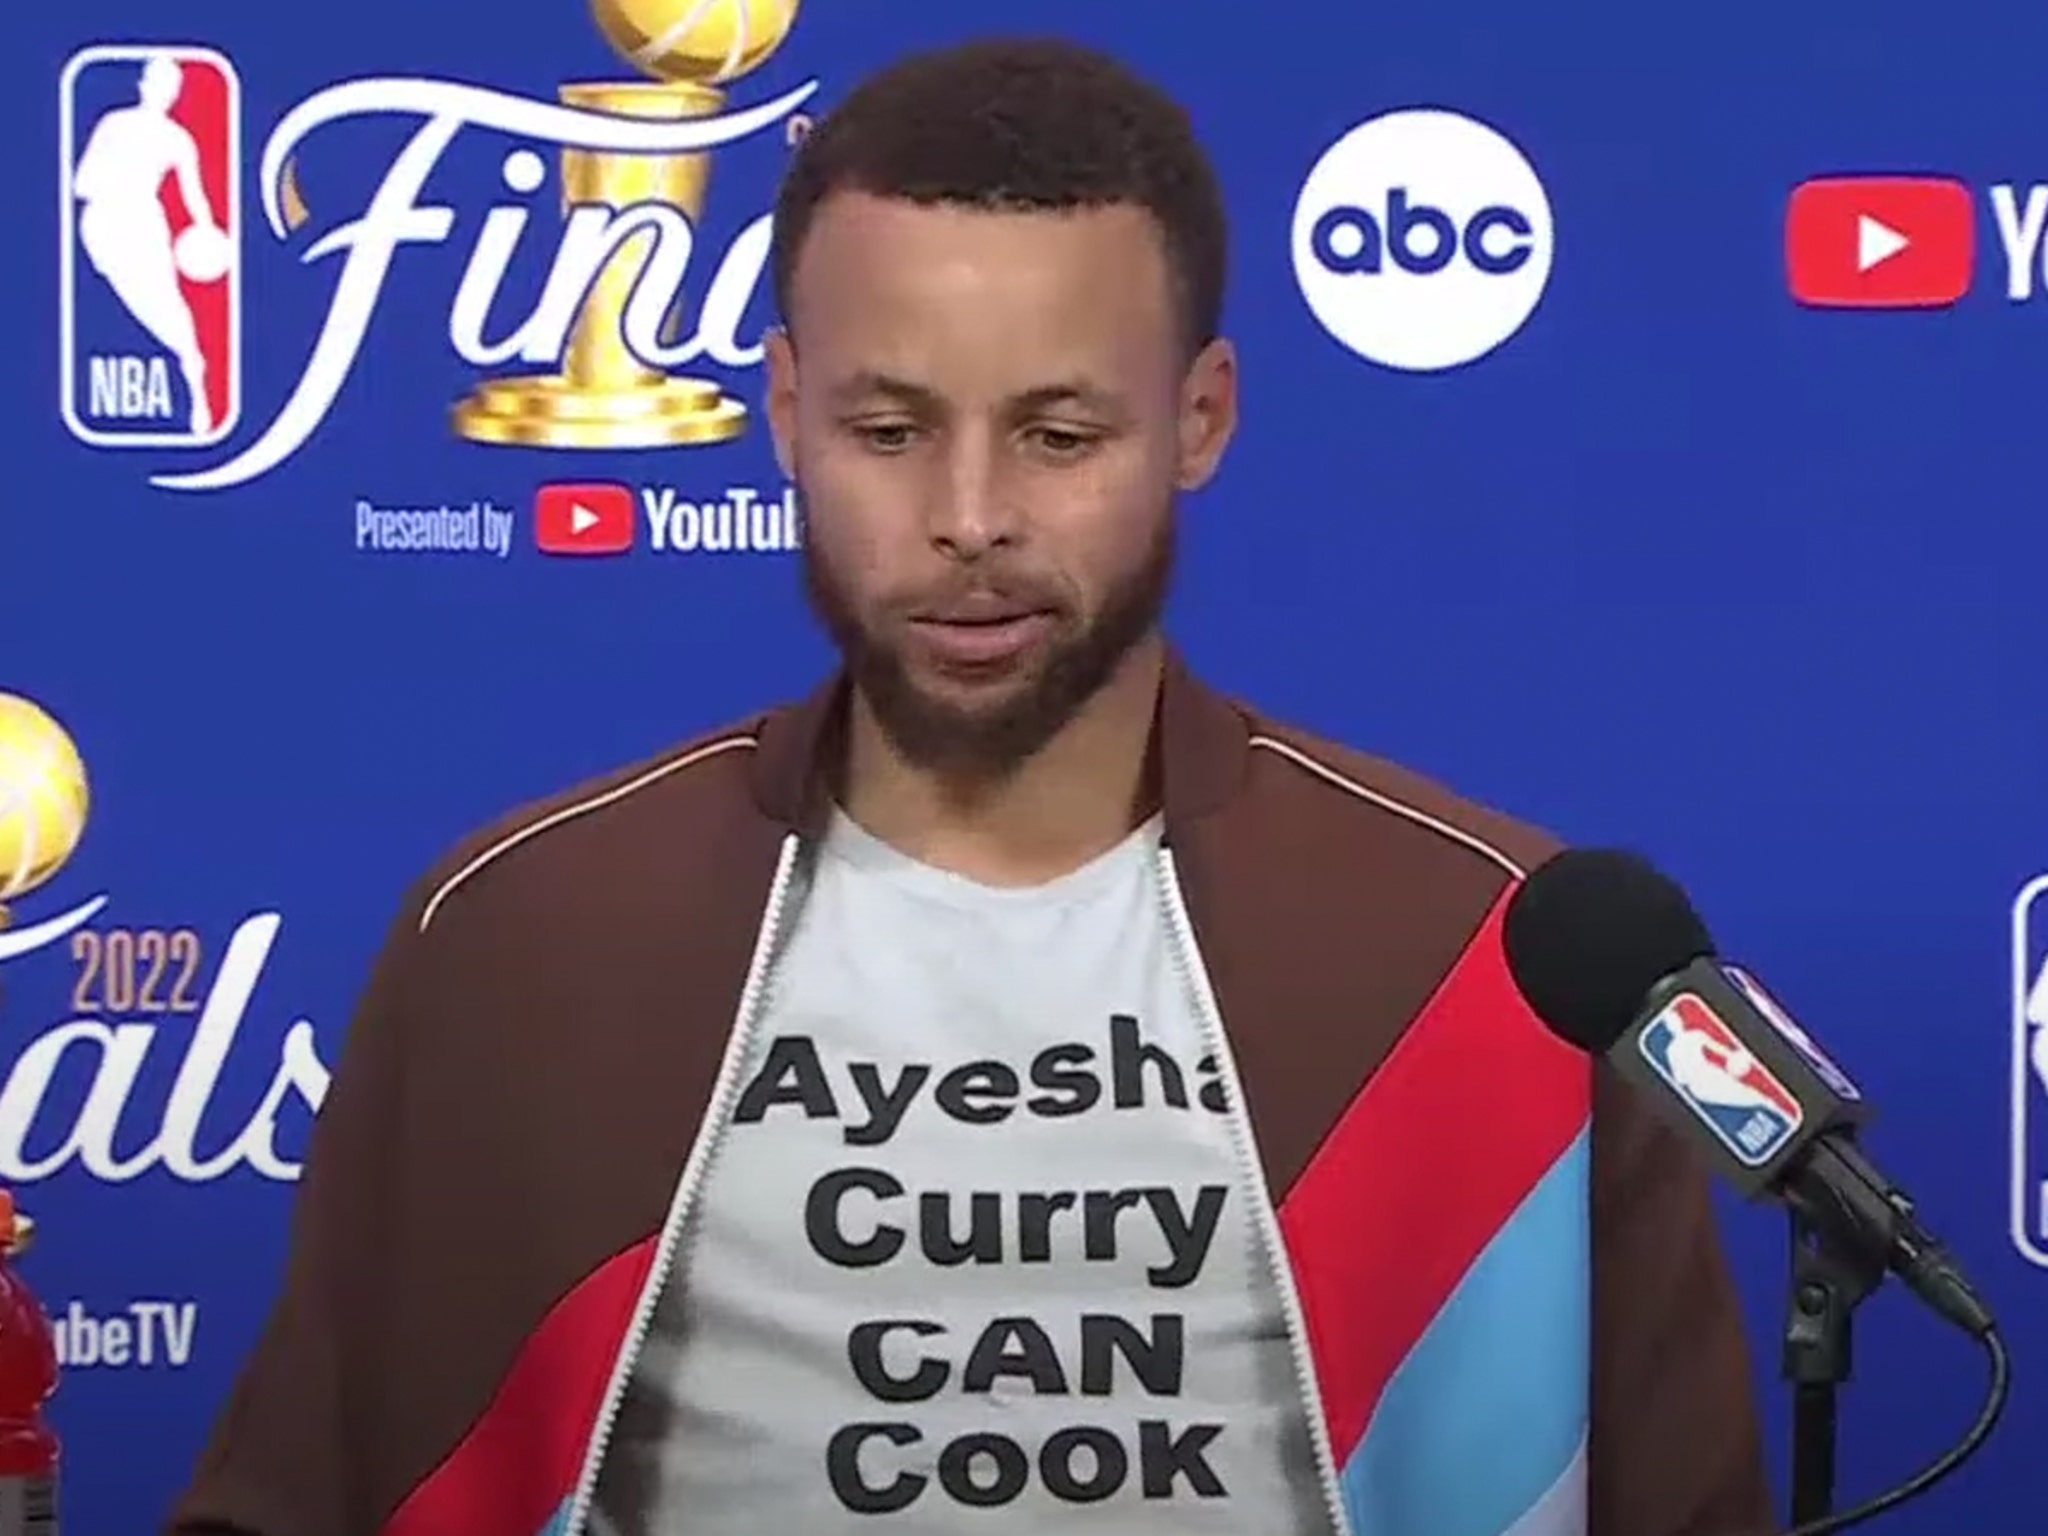 NBA World Reacts To Ayesha Curry's Parade Outfit - The Spun